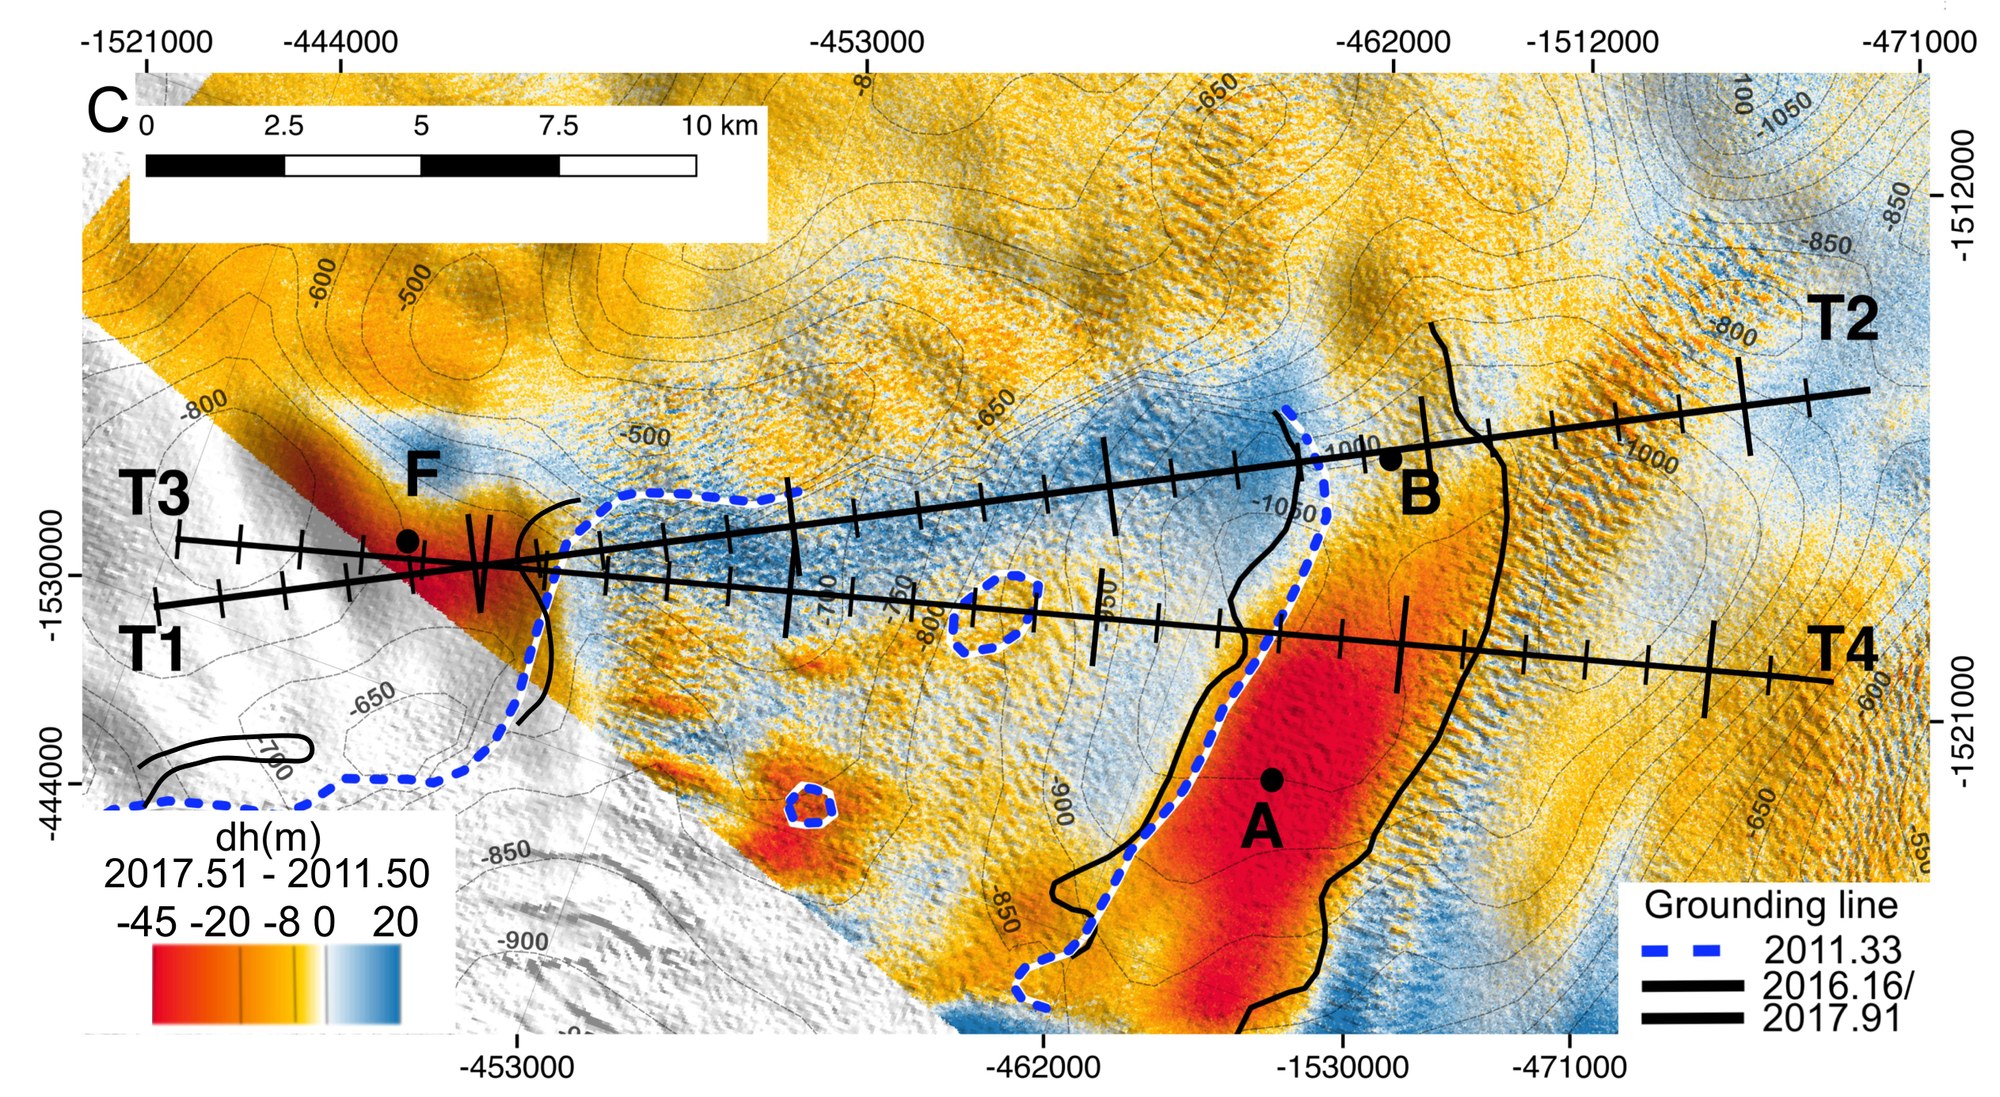 Elevation changes of the glacier surface